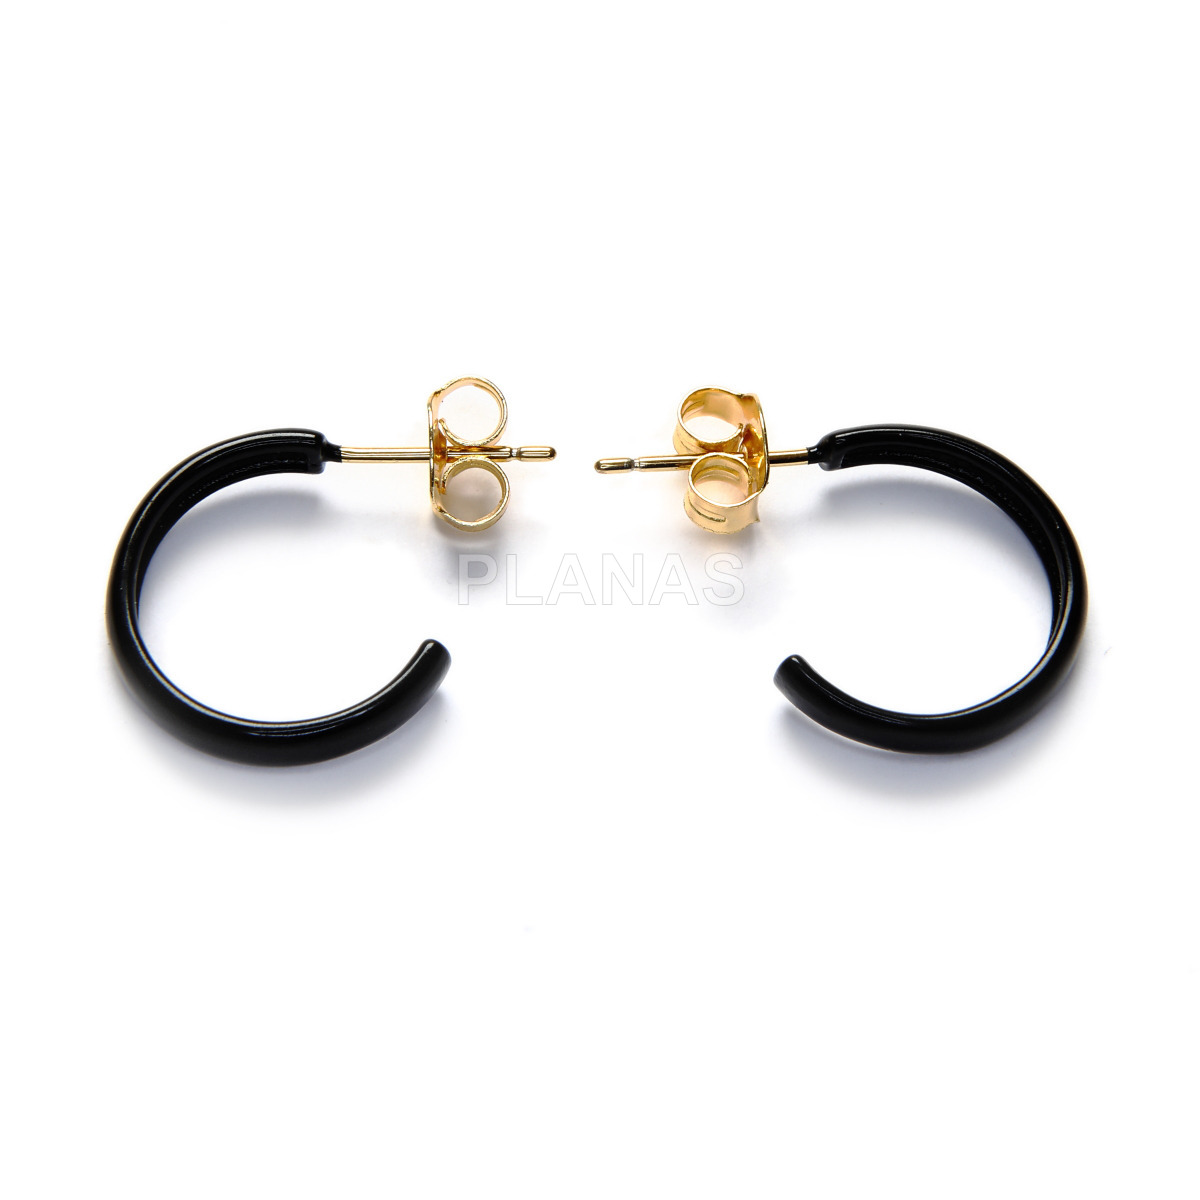 Hoops in sterling silver and gold bath with enamel.